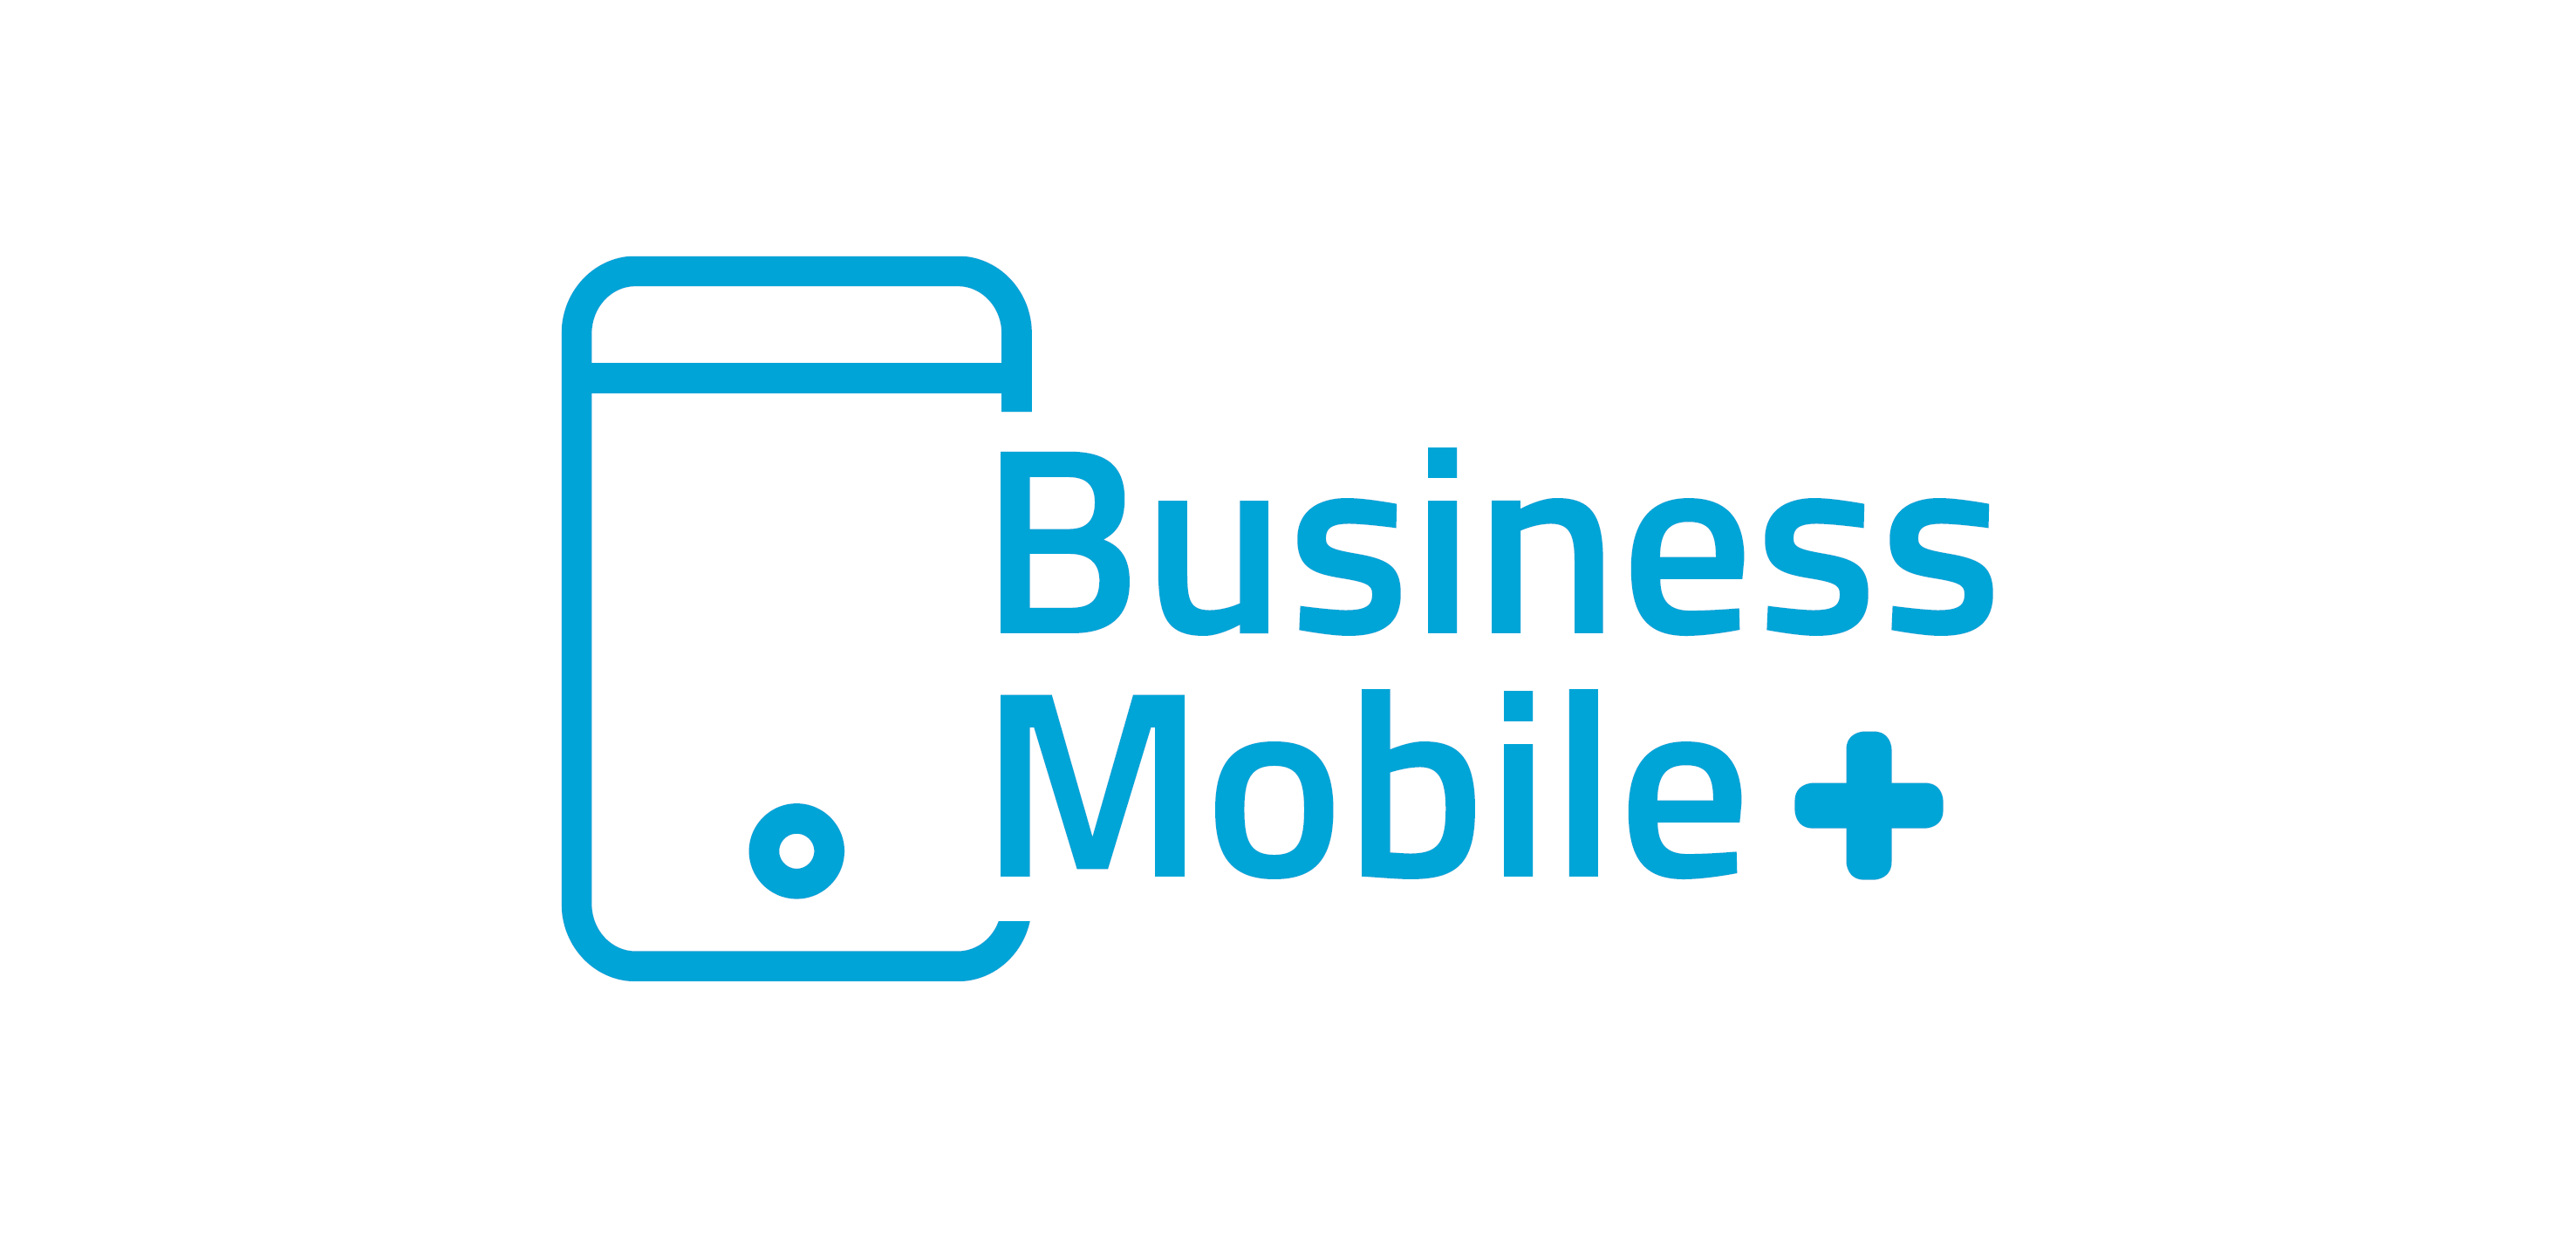 Business Mobile Phones,Mobiles Exeter,iPhone,MDM,Managed Services